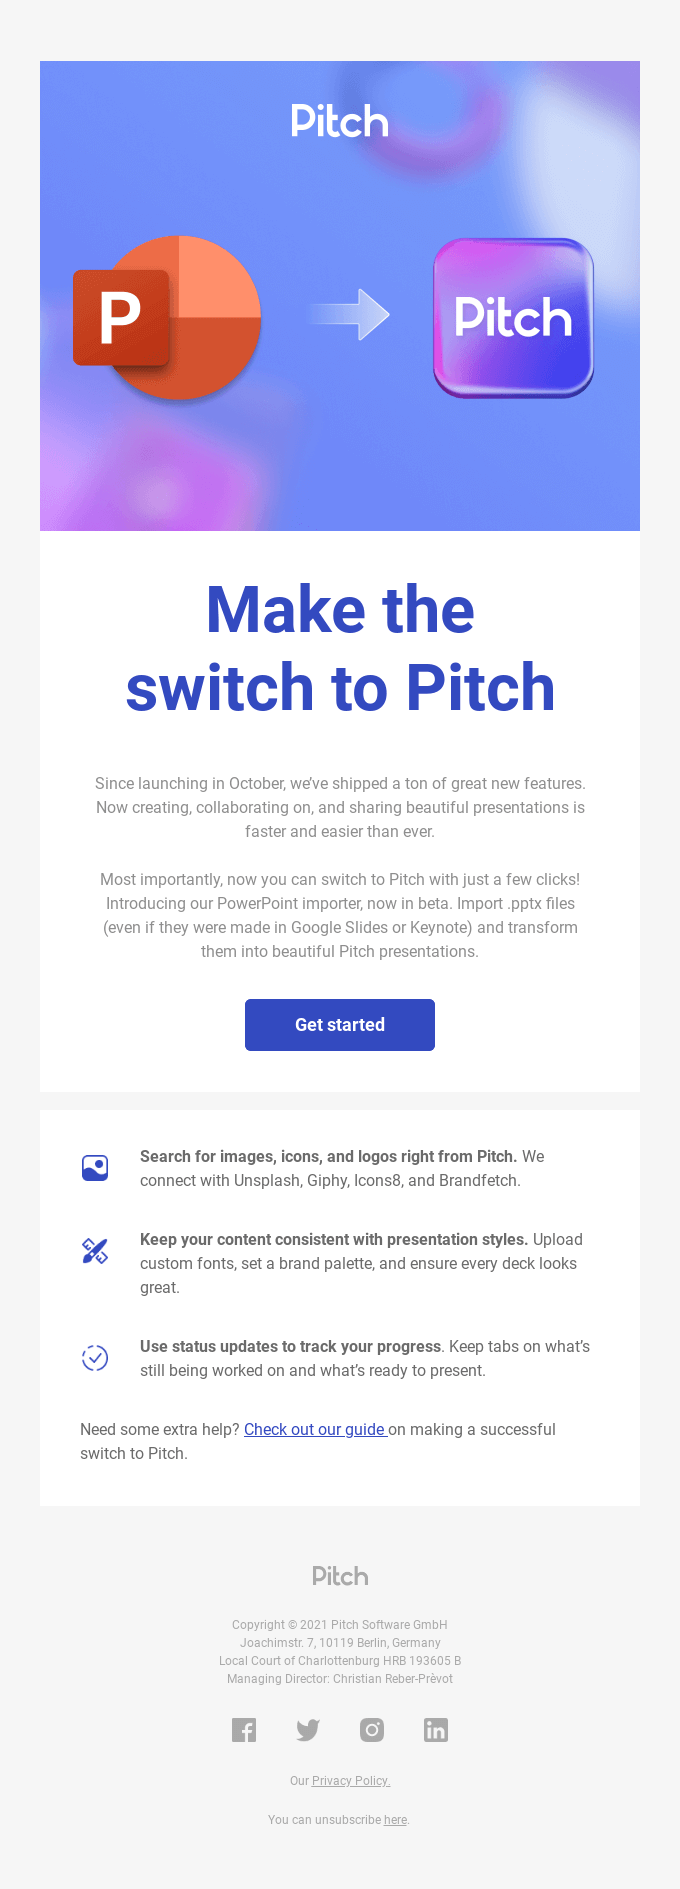 Switching to Pitch is now easier than ever - Pitch Email Newsletter